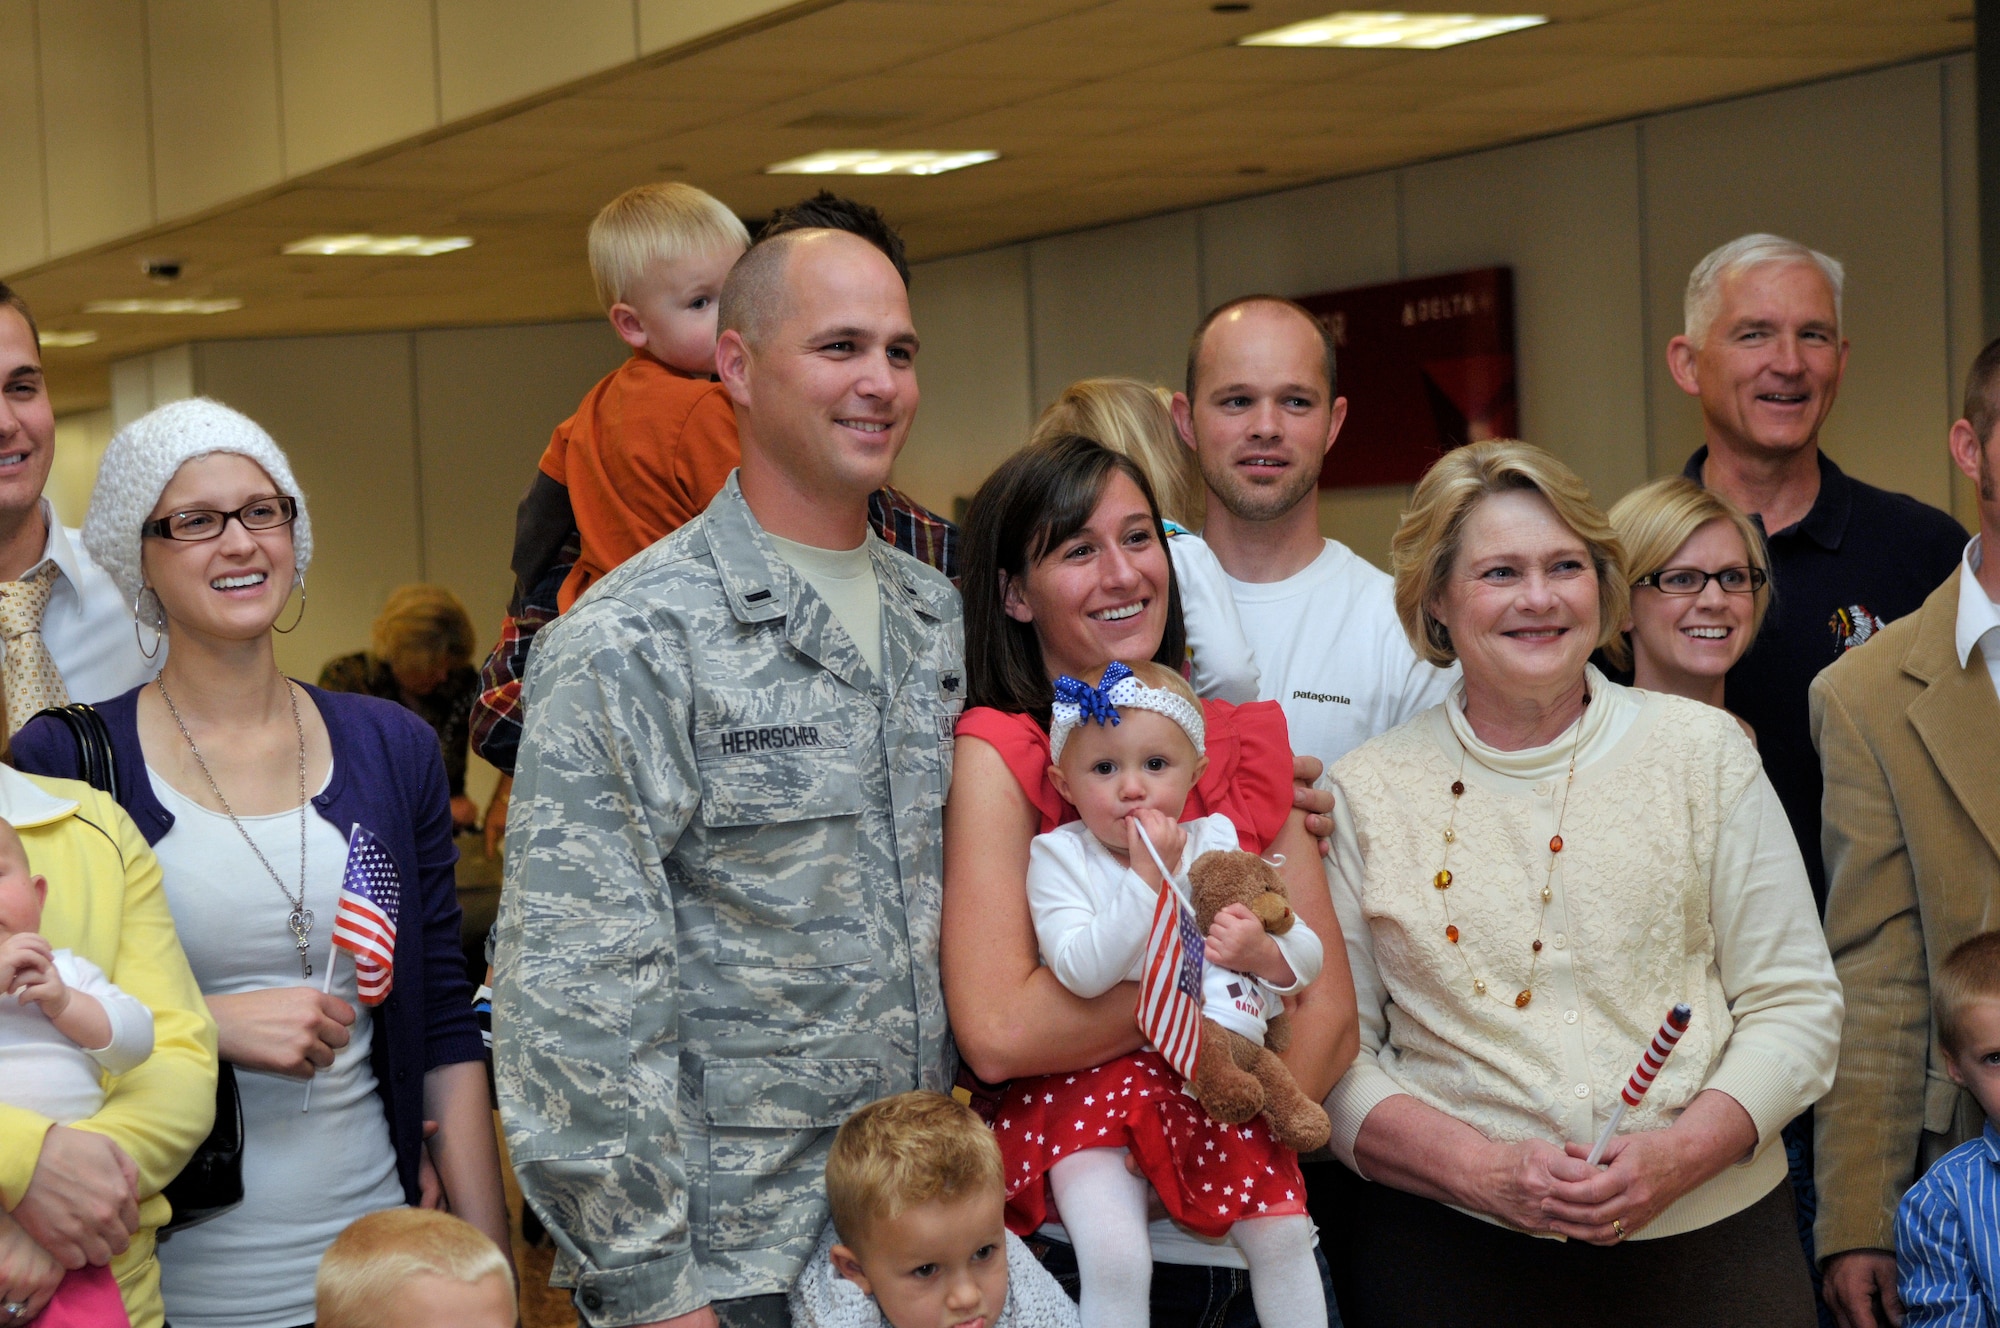 1st Lt. Brian Herrscher, 130th Engineering Installation Squadron, poses for a photo with his family at the Salt Lake City International Airport after returning from a six-month deployment to the Middle East on Sunday Oct. 21, 2012. Herrscher, along with 13 others from the 130th EIS were deployed to the Middle East in support of Operation Enduring Freedom. (U.S. Air Force Photo by Tech. Sgt. Jeremy Giacoletto-Stegall/Released)